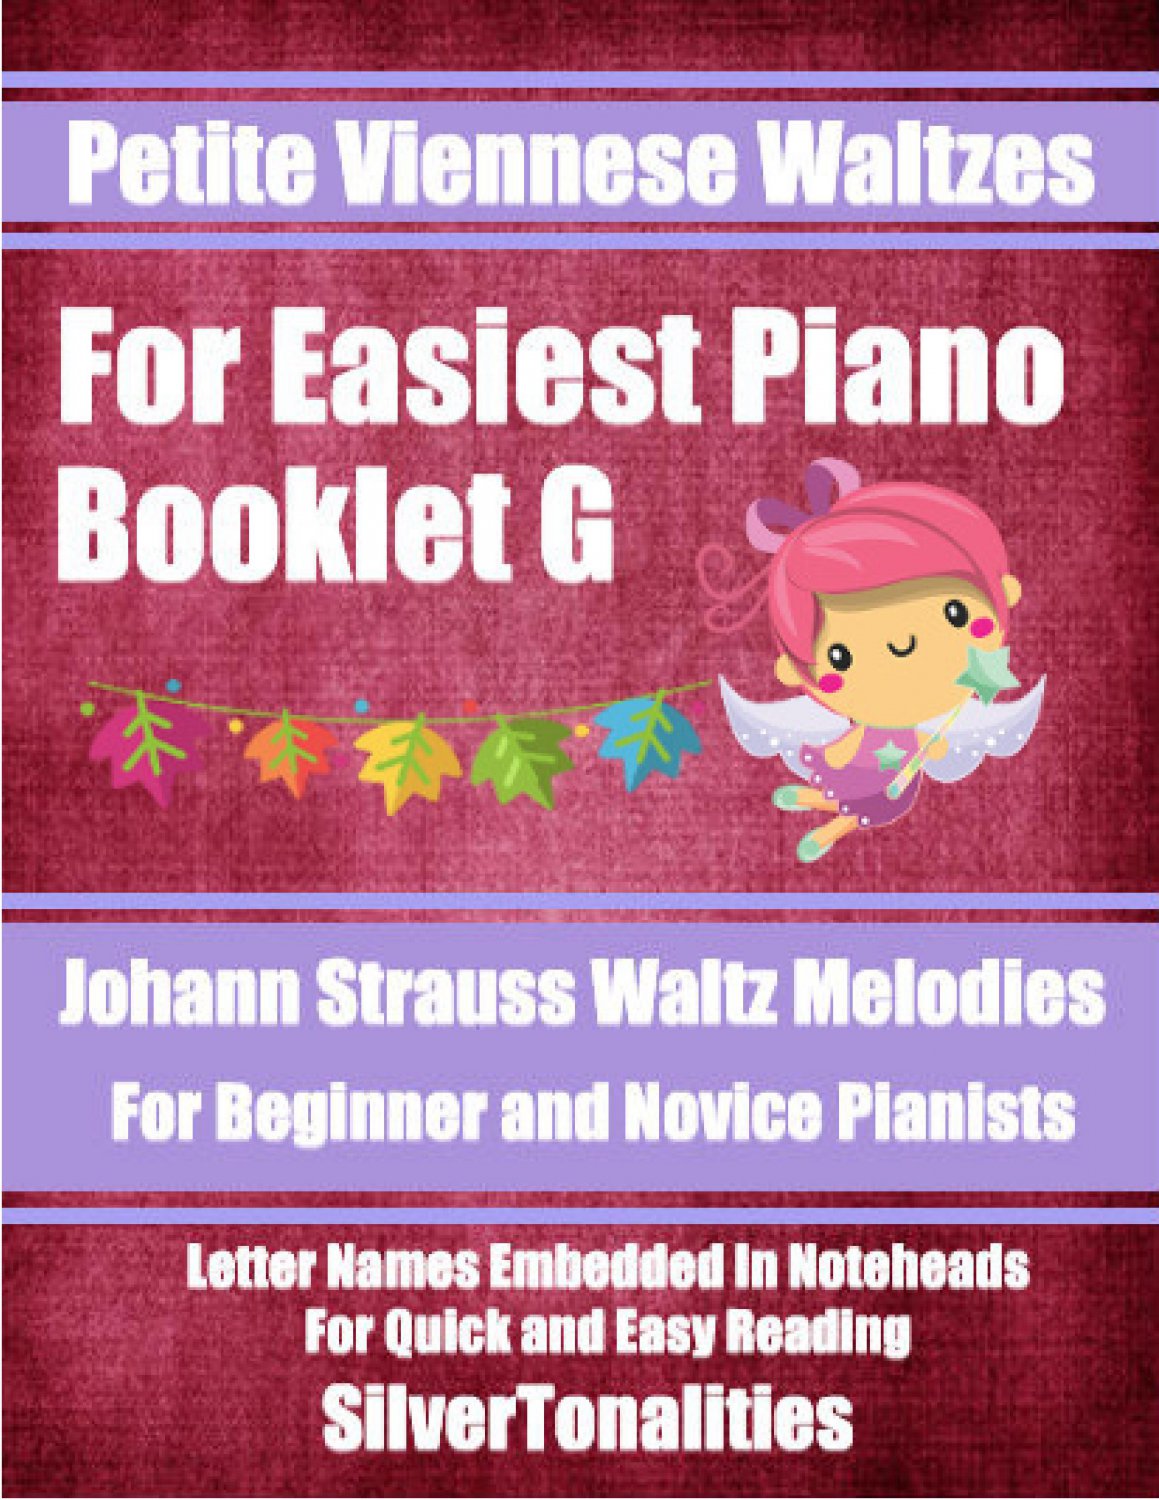 Petite Viennese Waltzes for Easiest Piano Booklet G